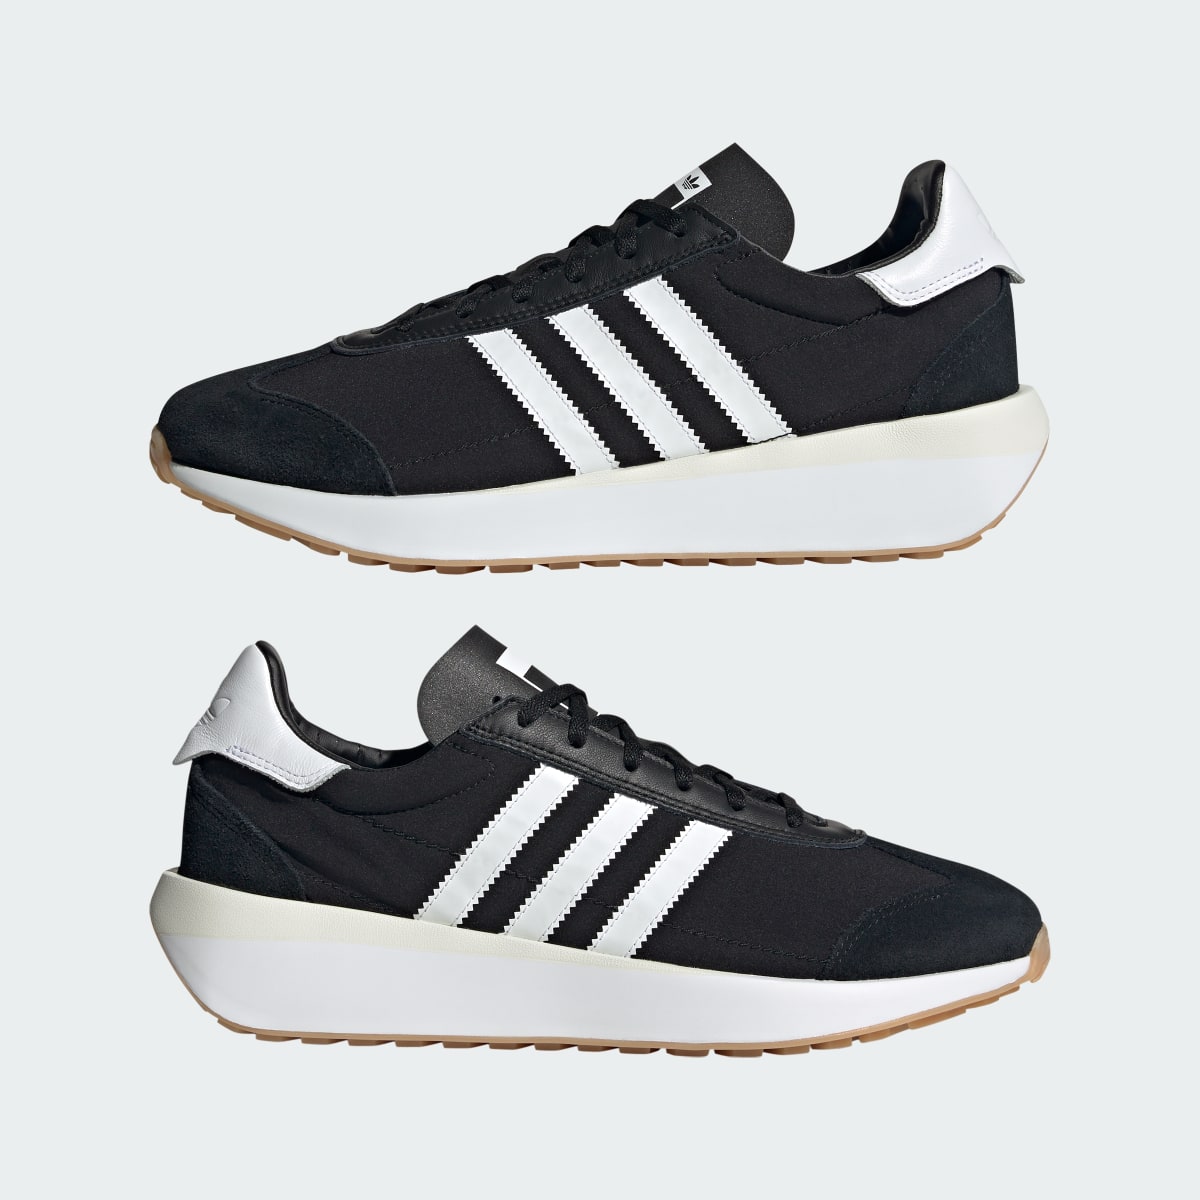 Adidas Sapatilhas Country XLG. 7